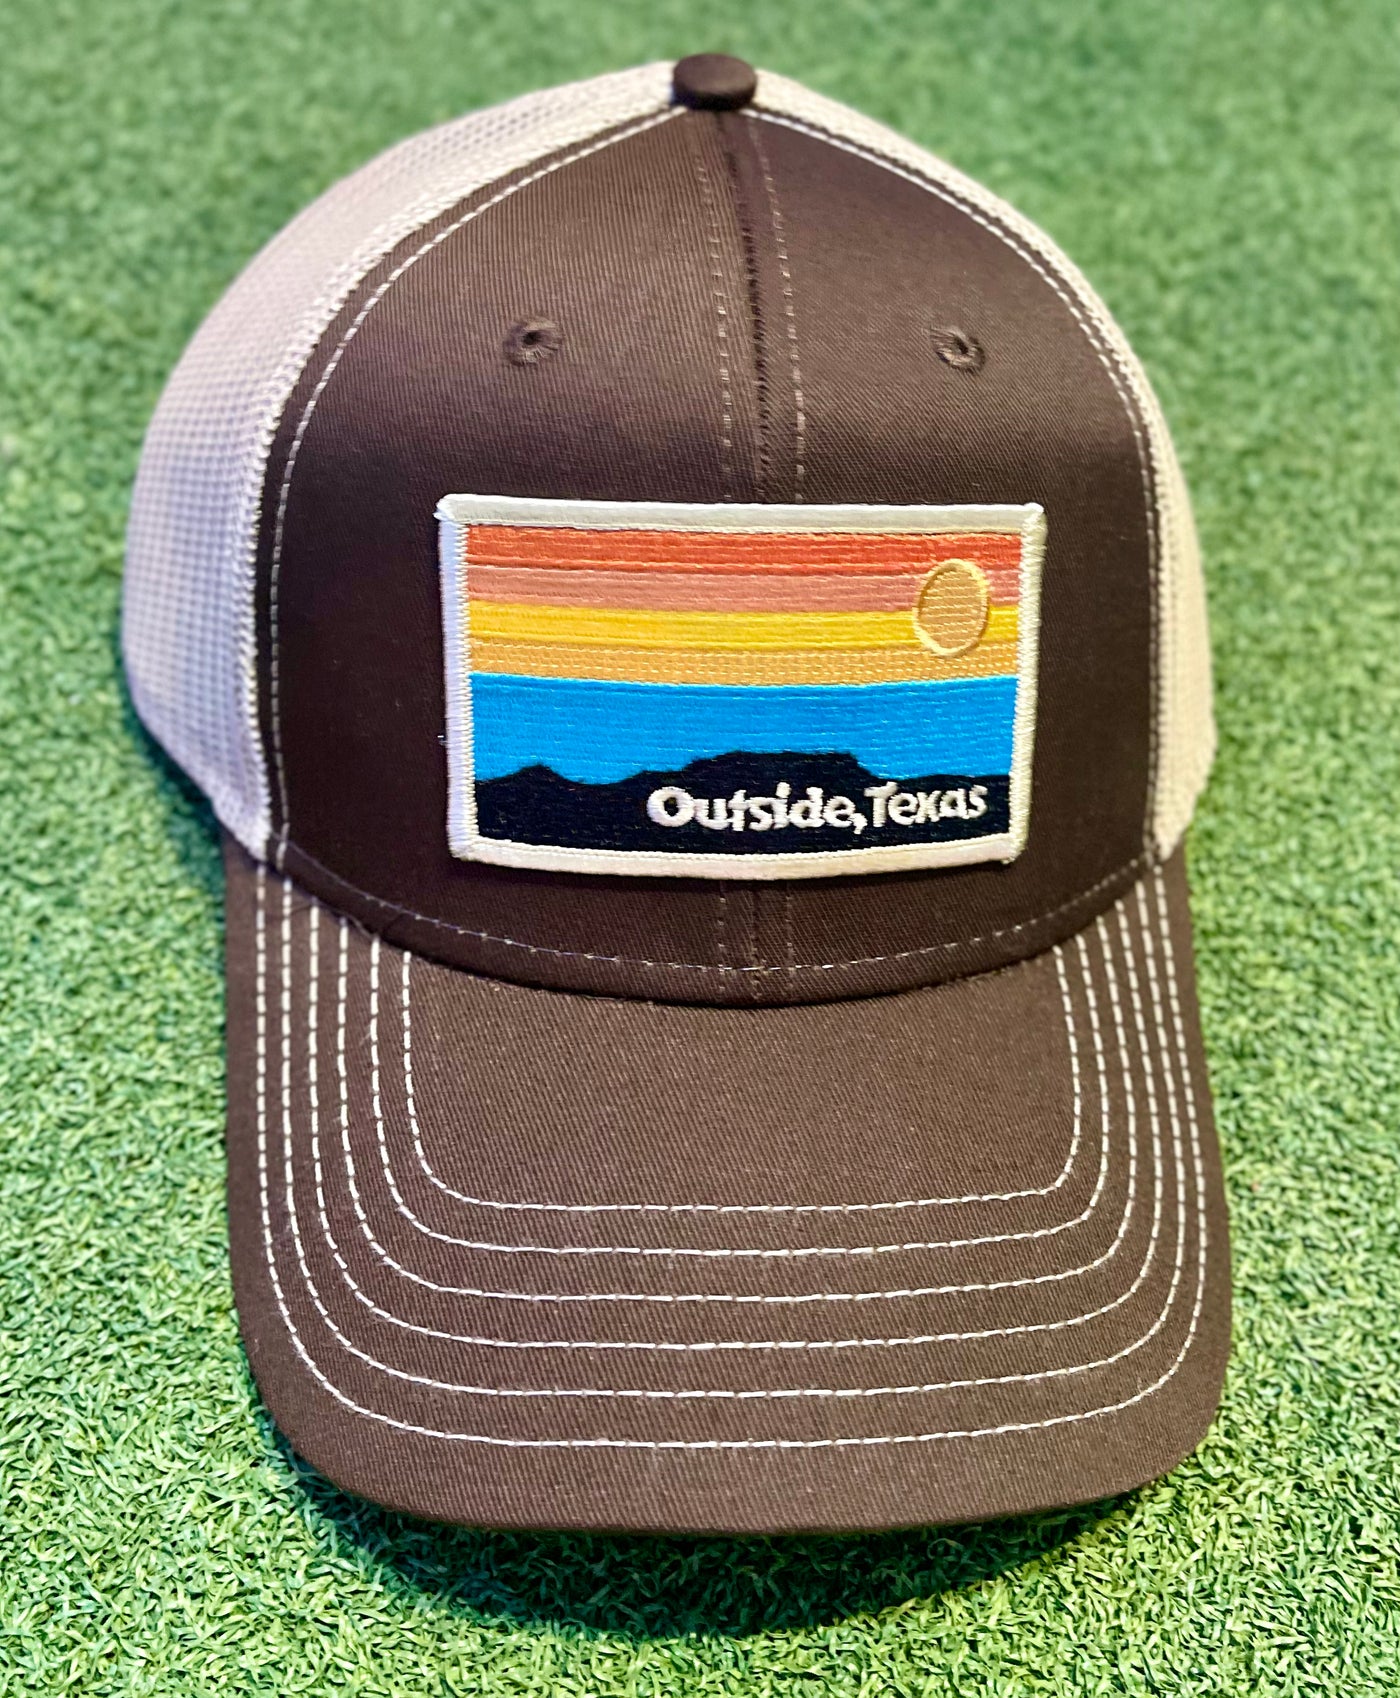 OTX Structured Hats